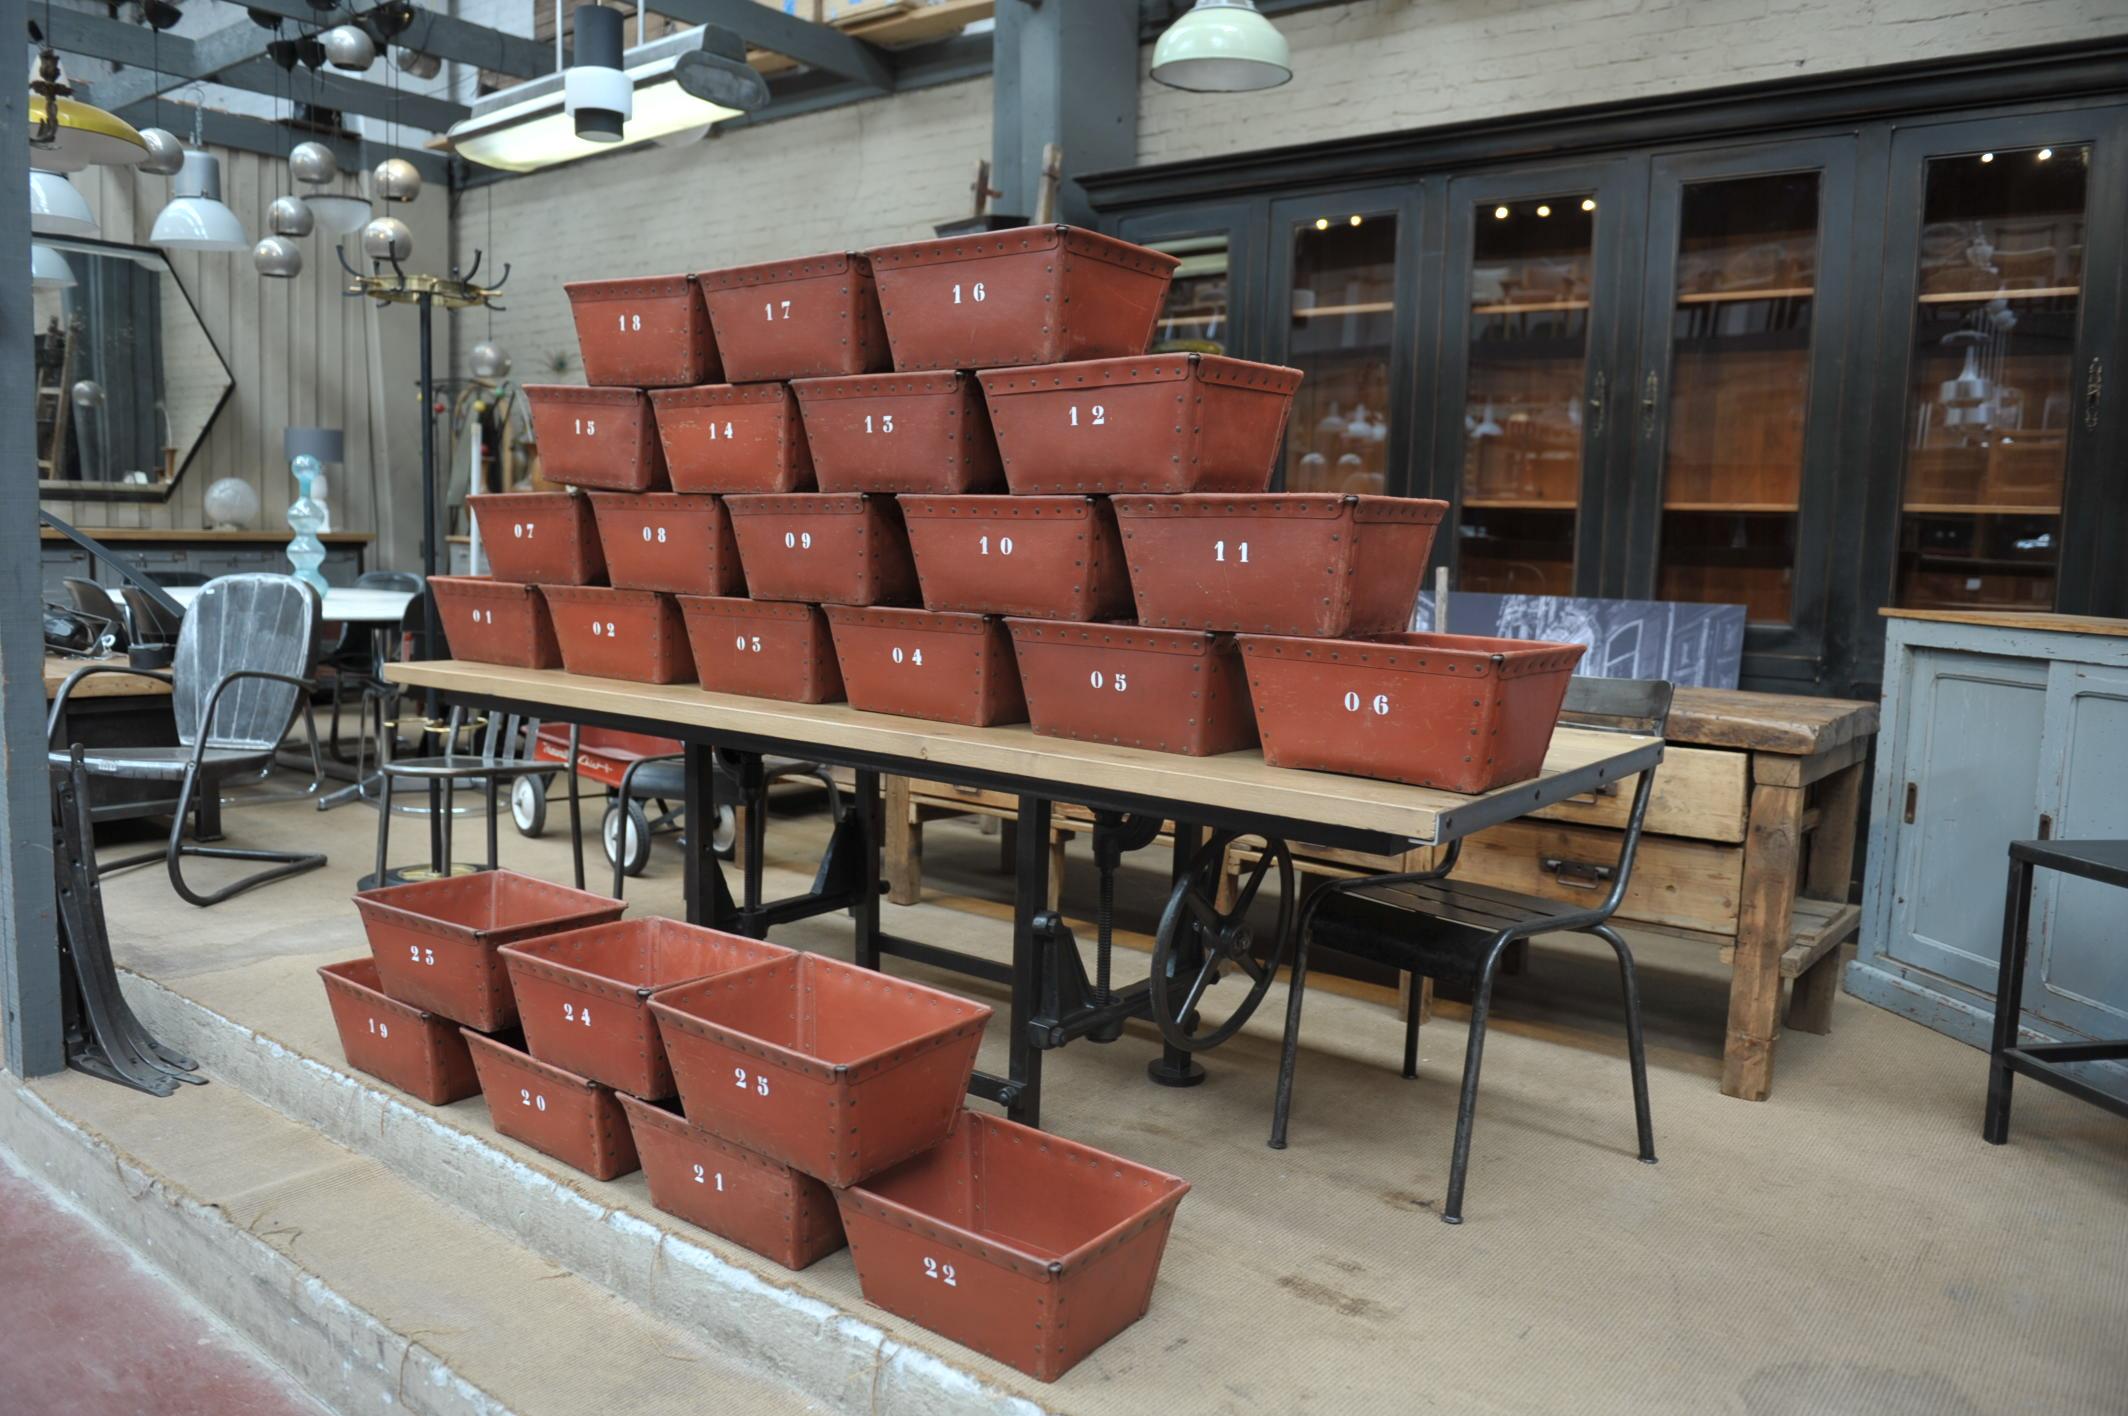 Textile Factory Industrial boxes by manufacturer Suroy (North of France) in dark red very strong boiled cardboard with rivets and iron circa 1950 sold minimum by 4 boxes.